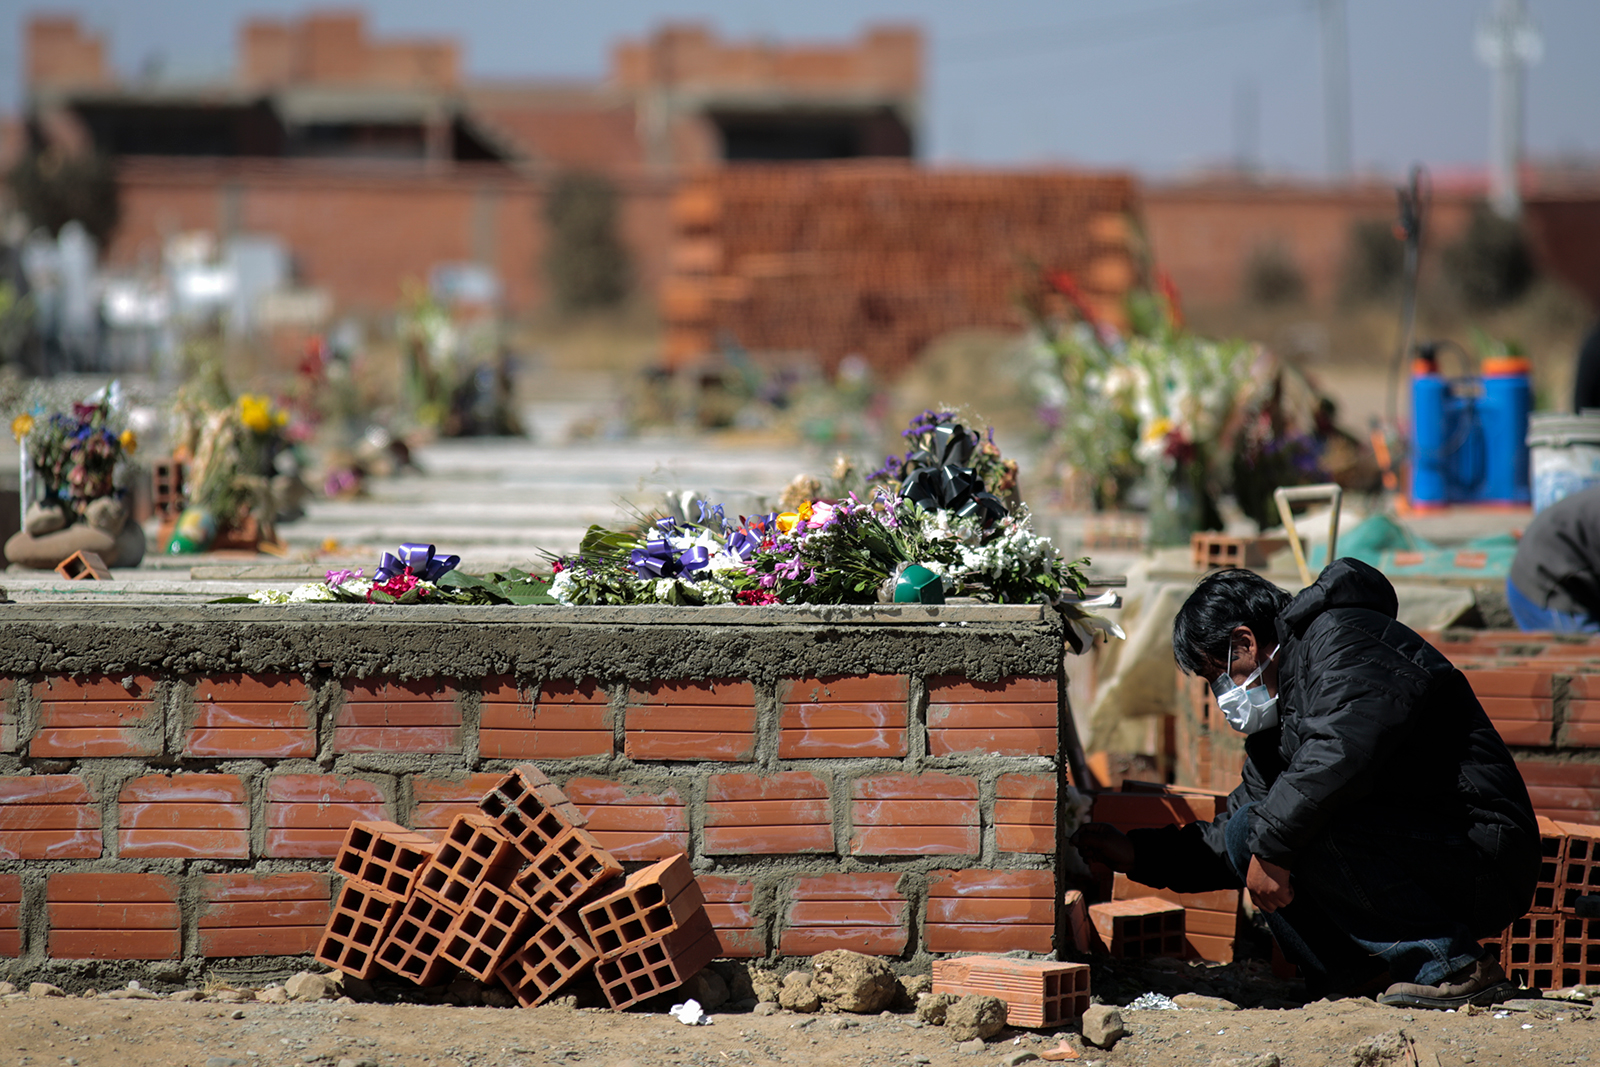 A mourner writes the name of the deceased on the fresh cement at Mercedario Cemetery in El Alto, Bolivia, on July 29.